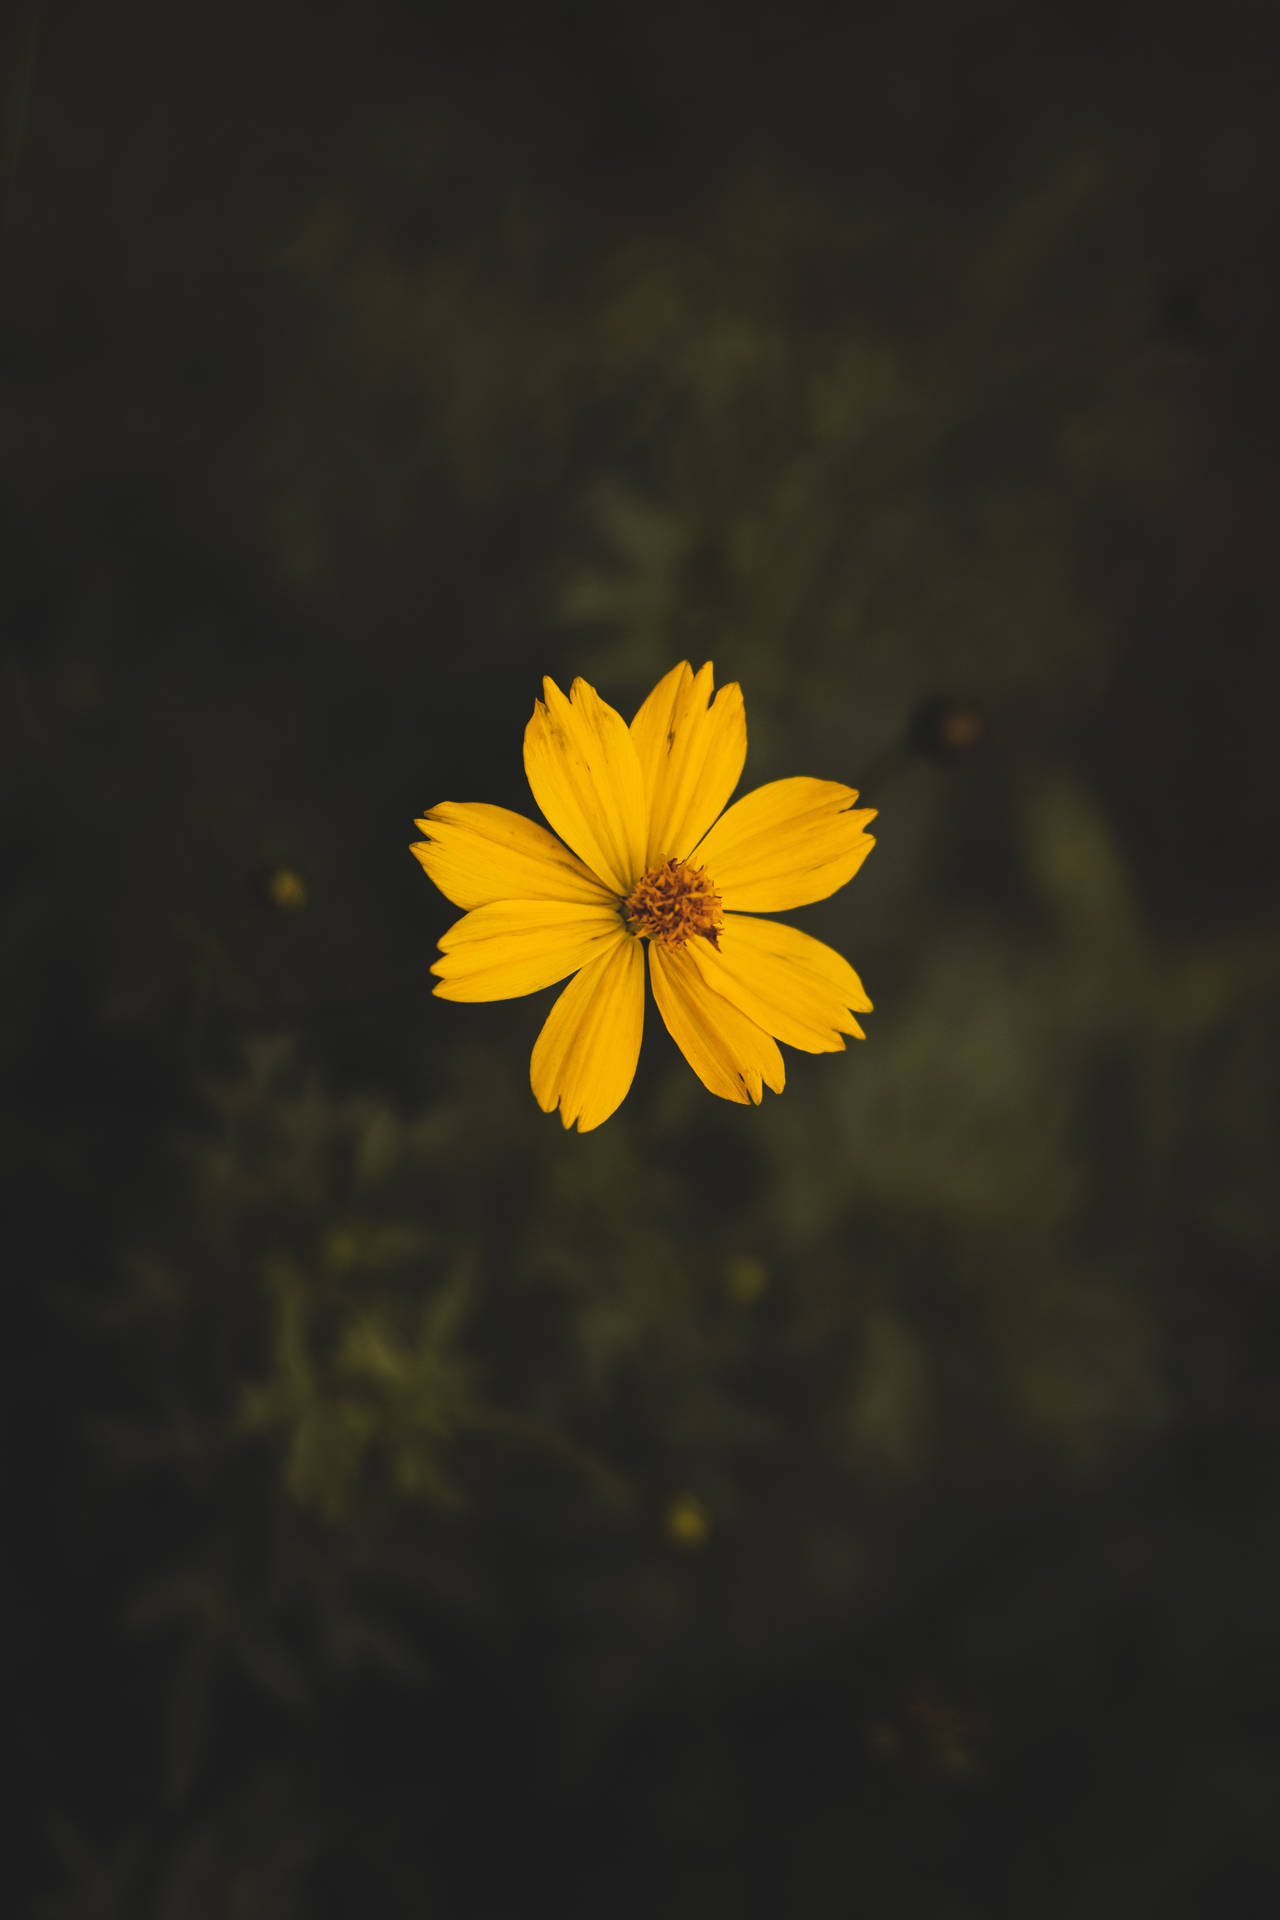 Coolest Iphone Yellow Flower Background